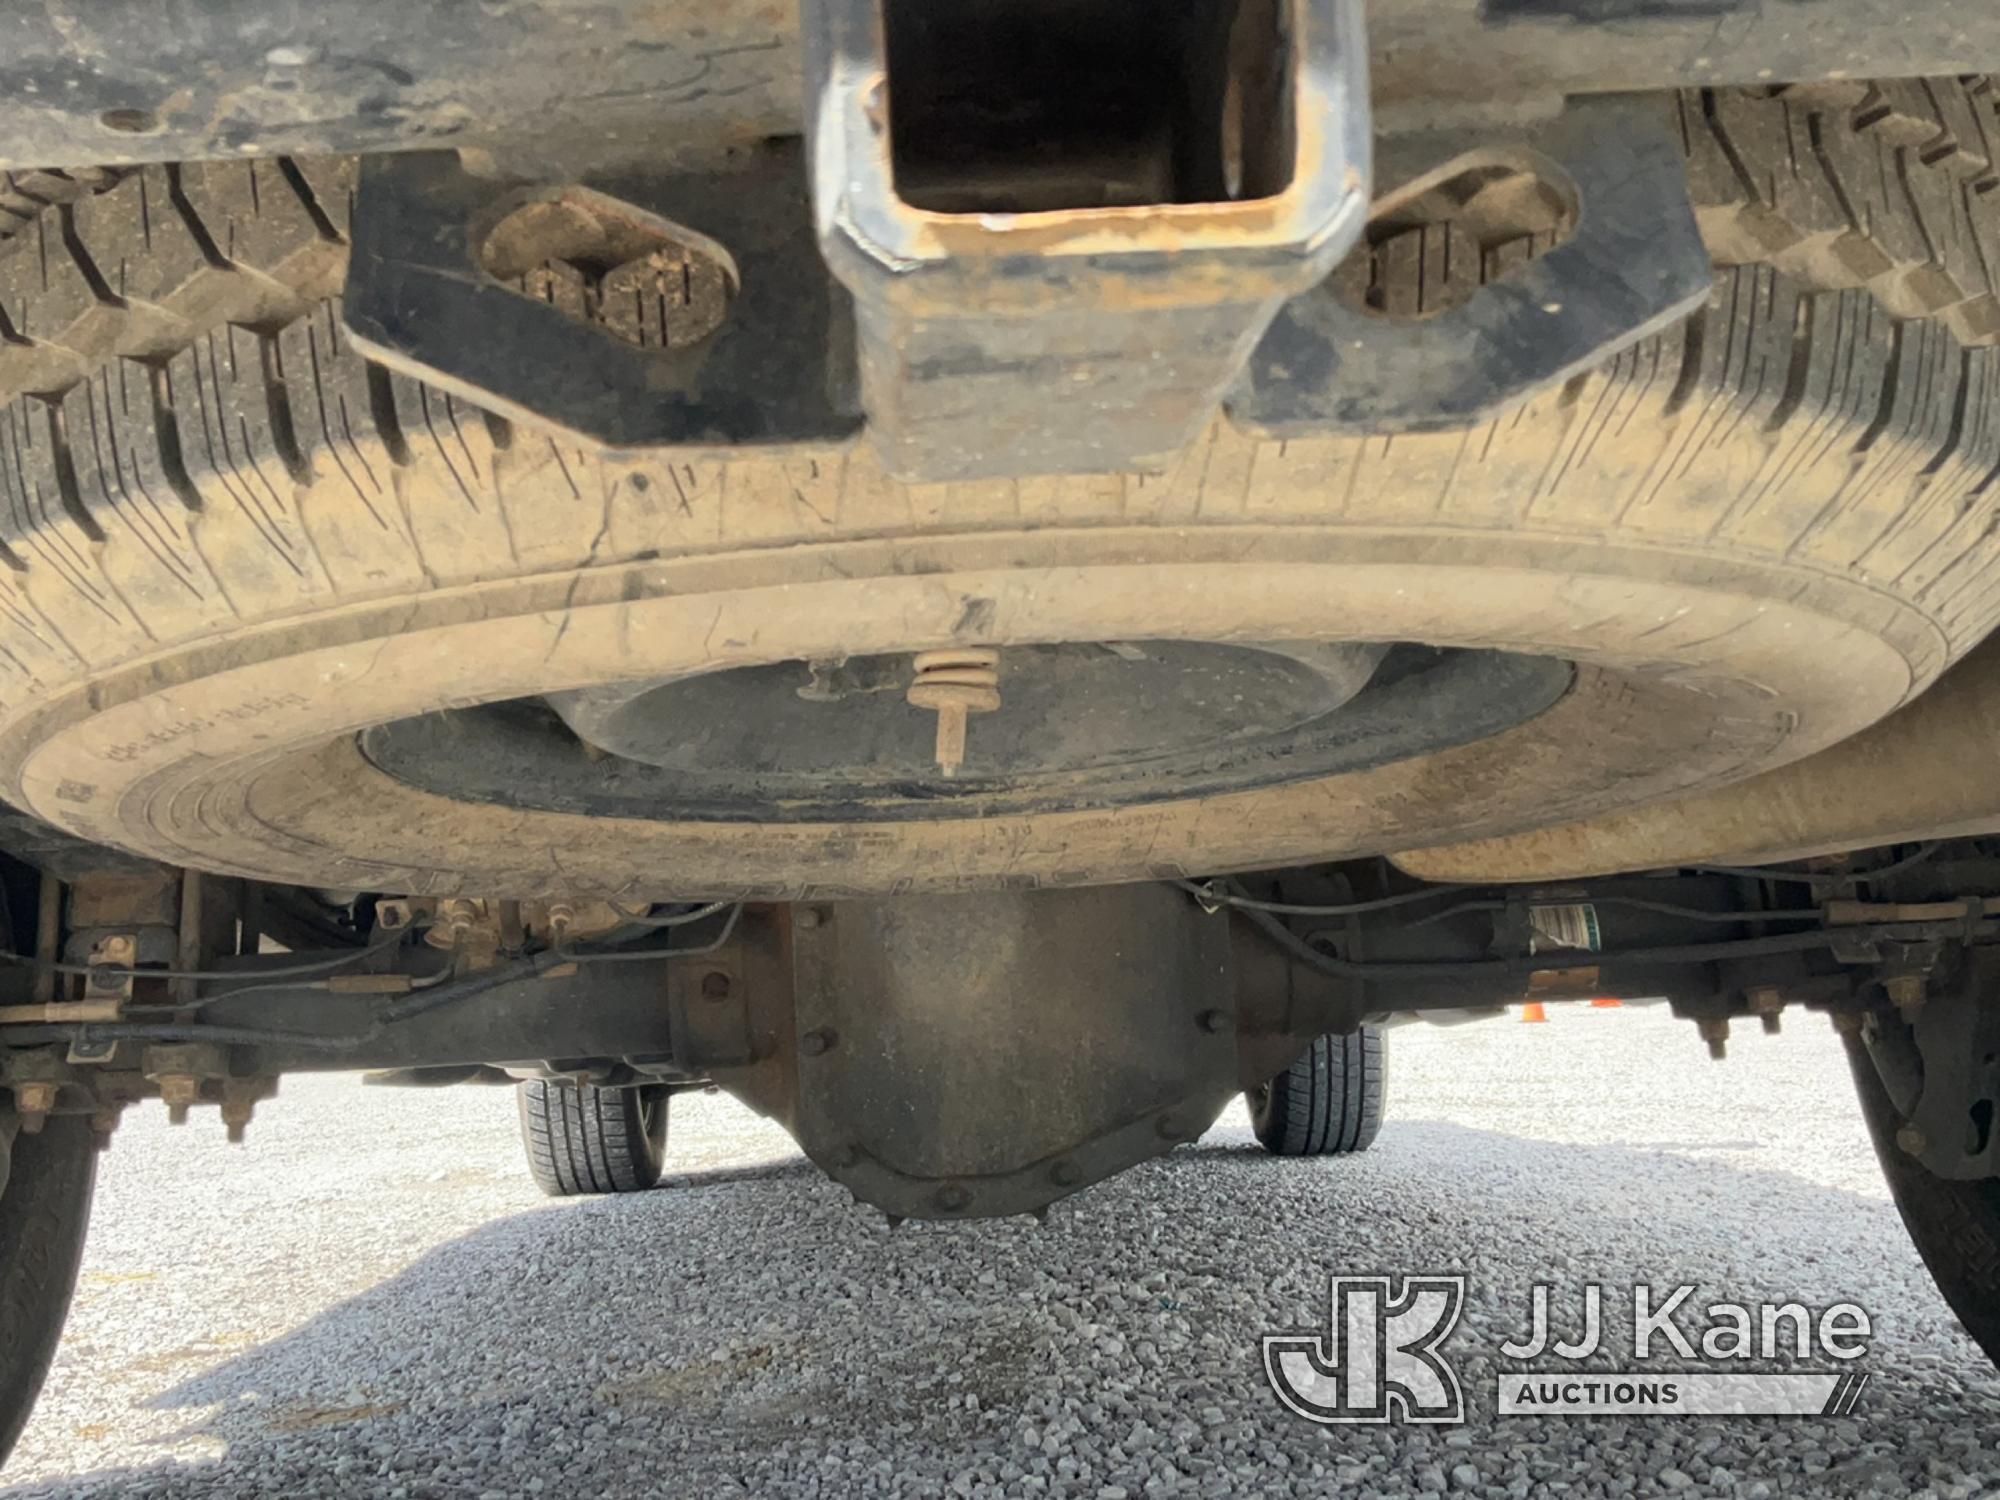 (Verona, KY) 2018 Ford F150 4x4 Crew-Cab Pickup Truck Runs & Moves) (Engine Noise, Body Damage, Will